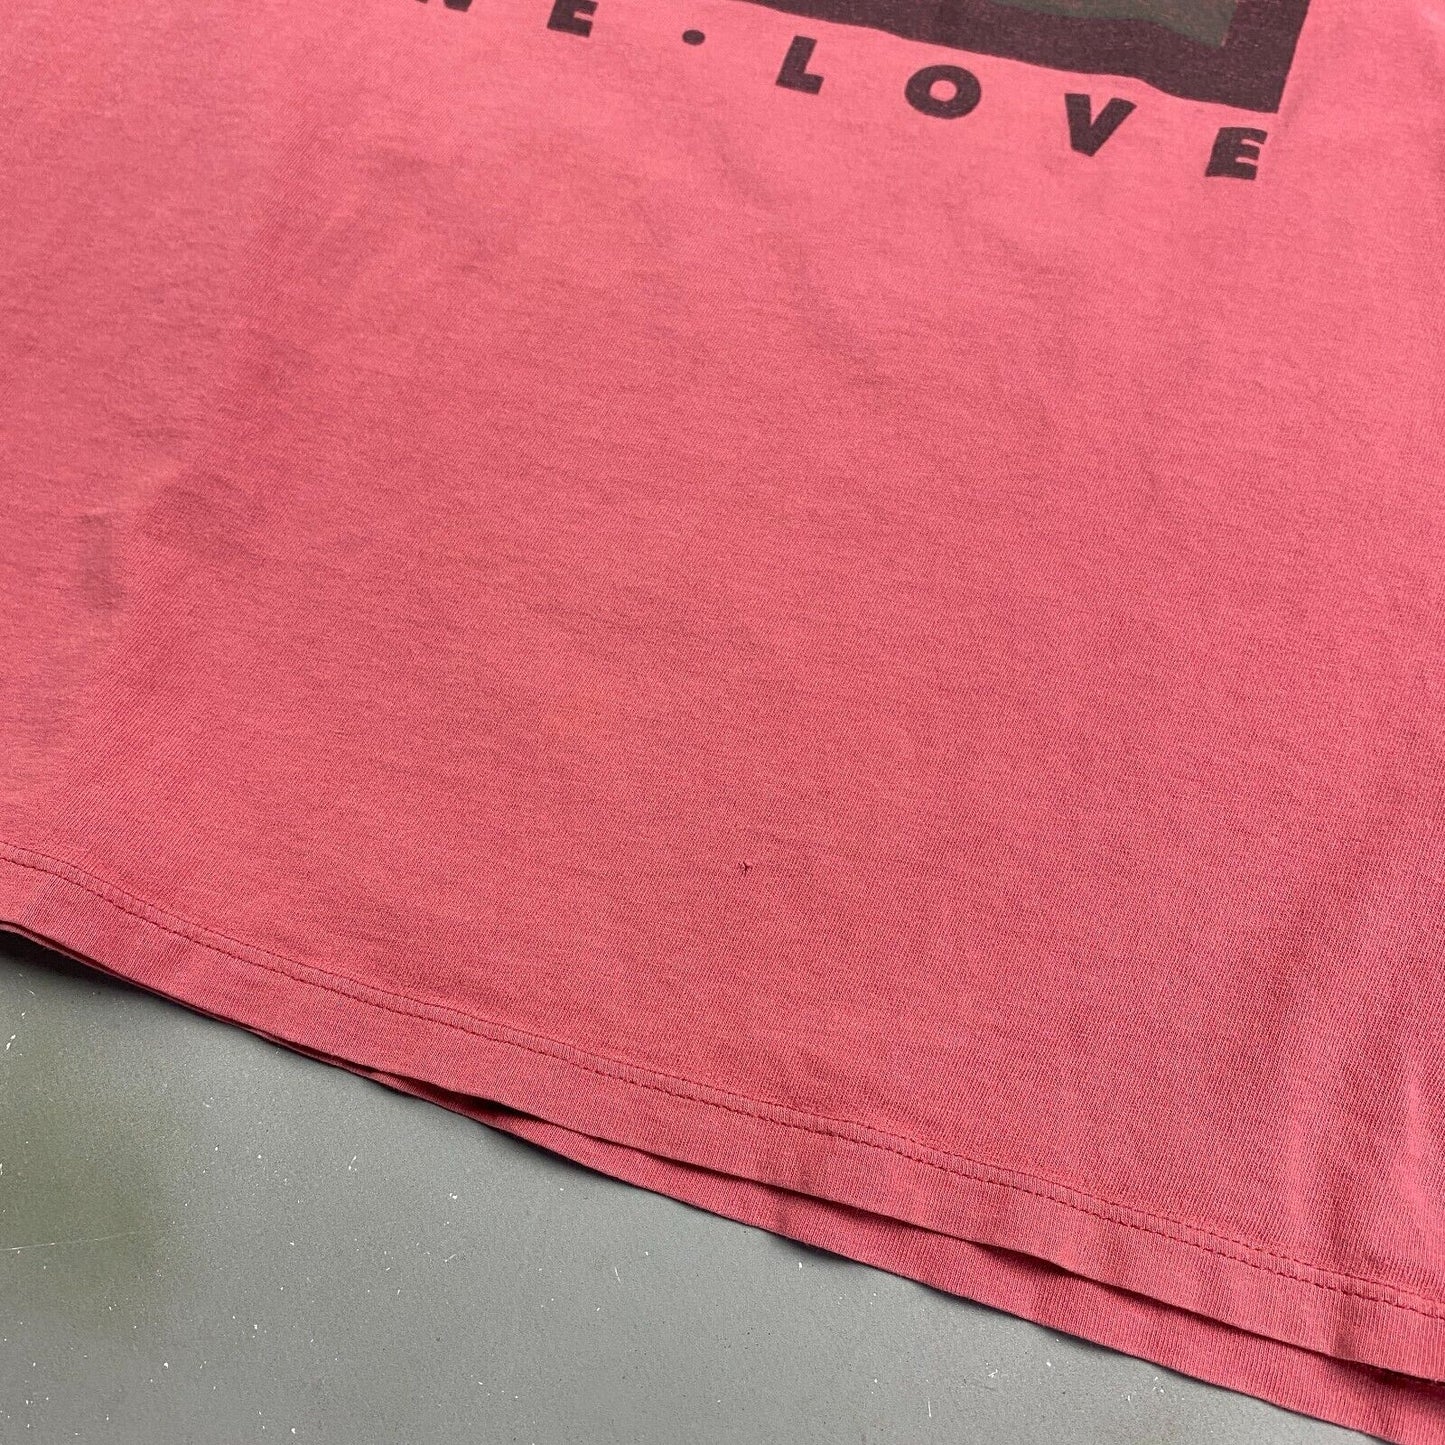 VINTAGE 90s One Life One Love Faded Pink T-Shirt sz XL Men Adult